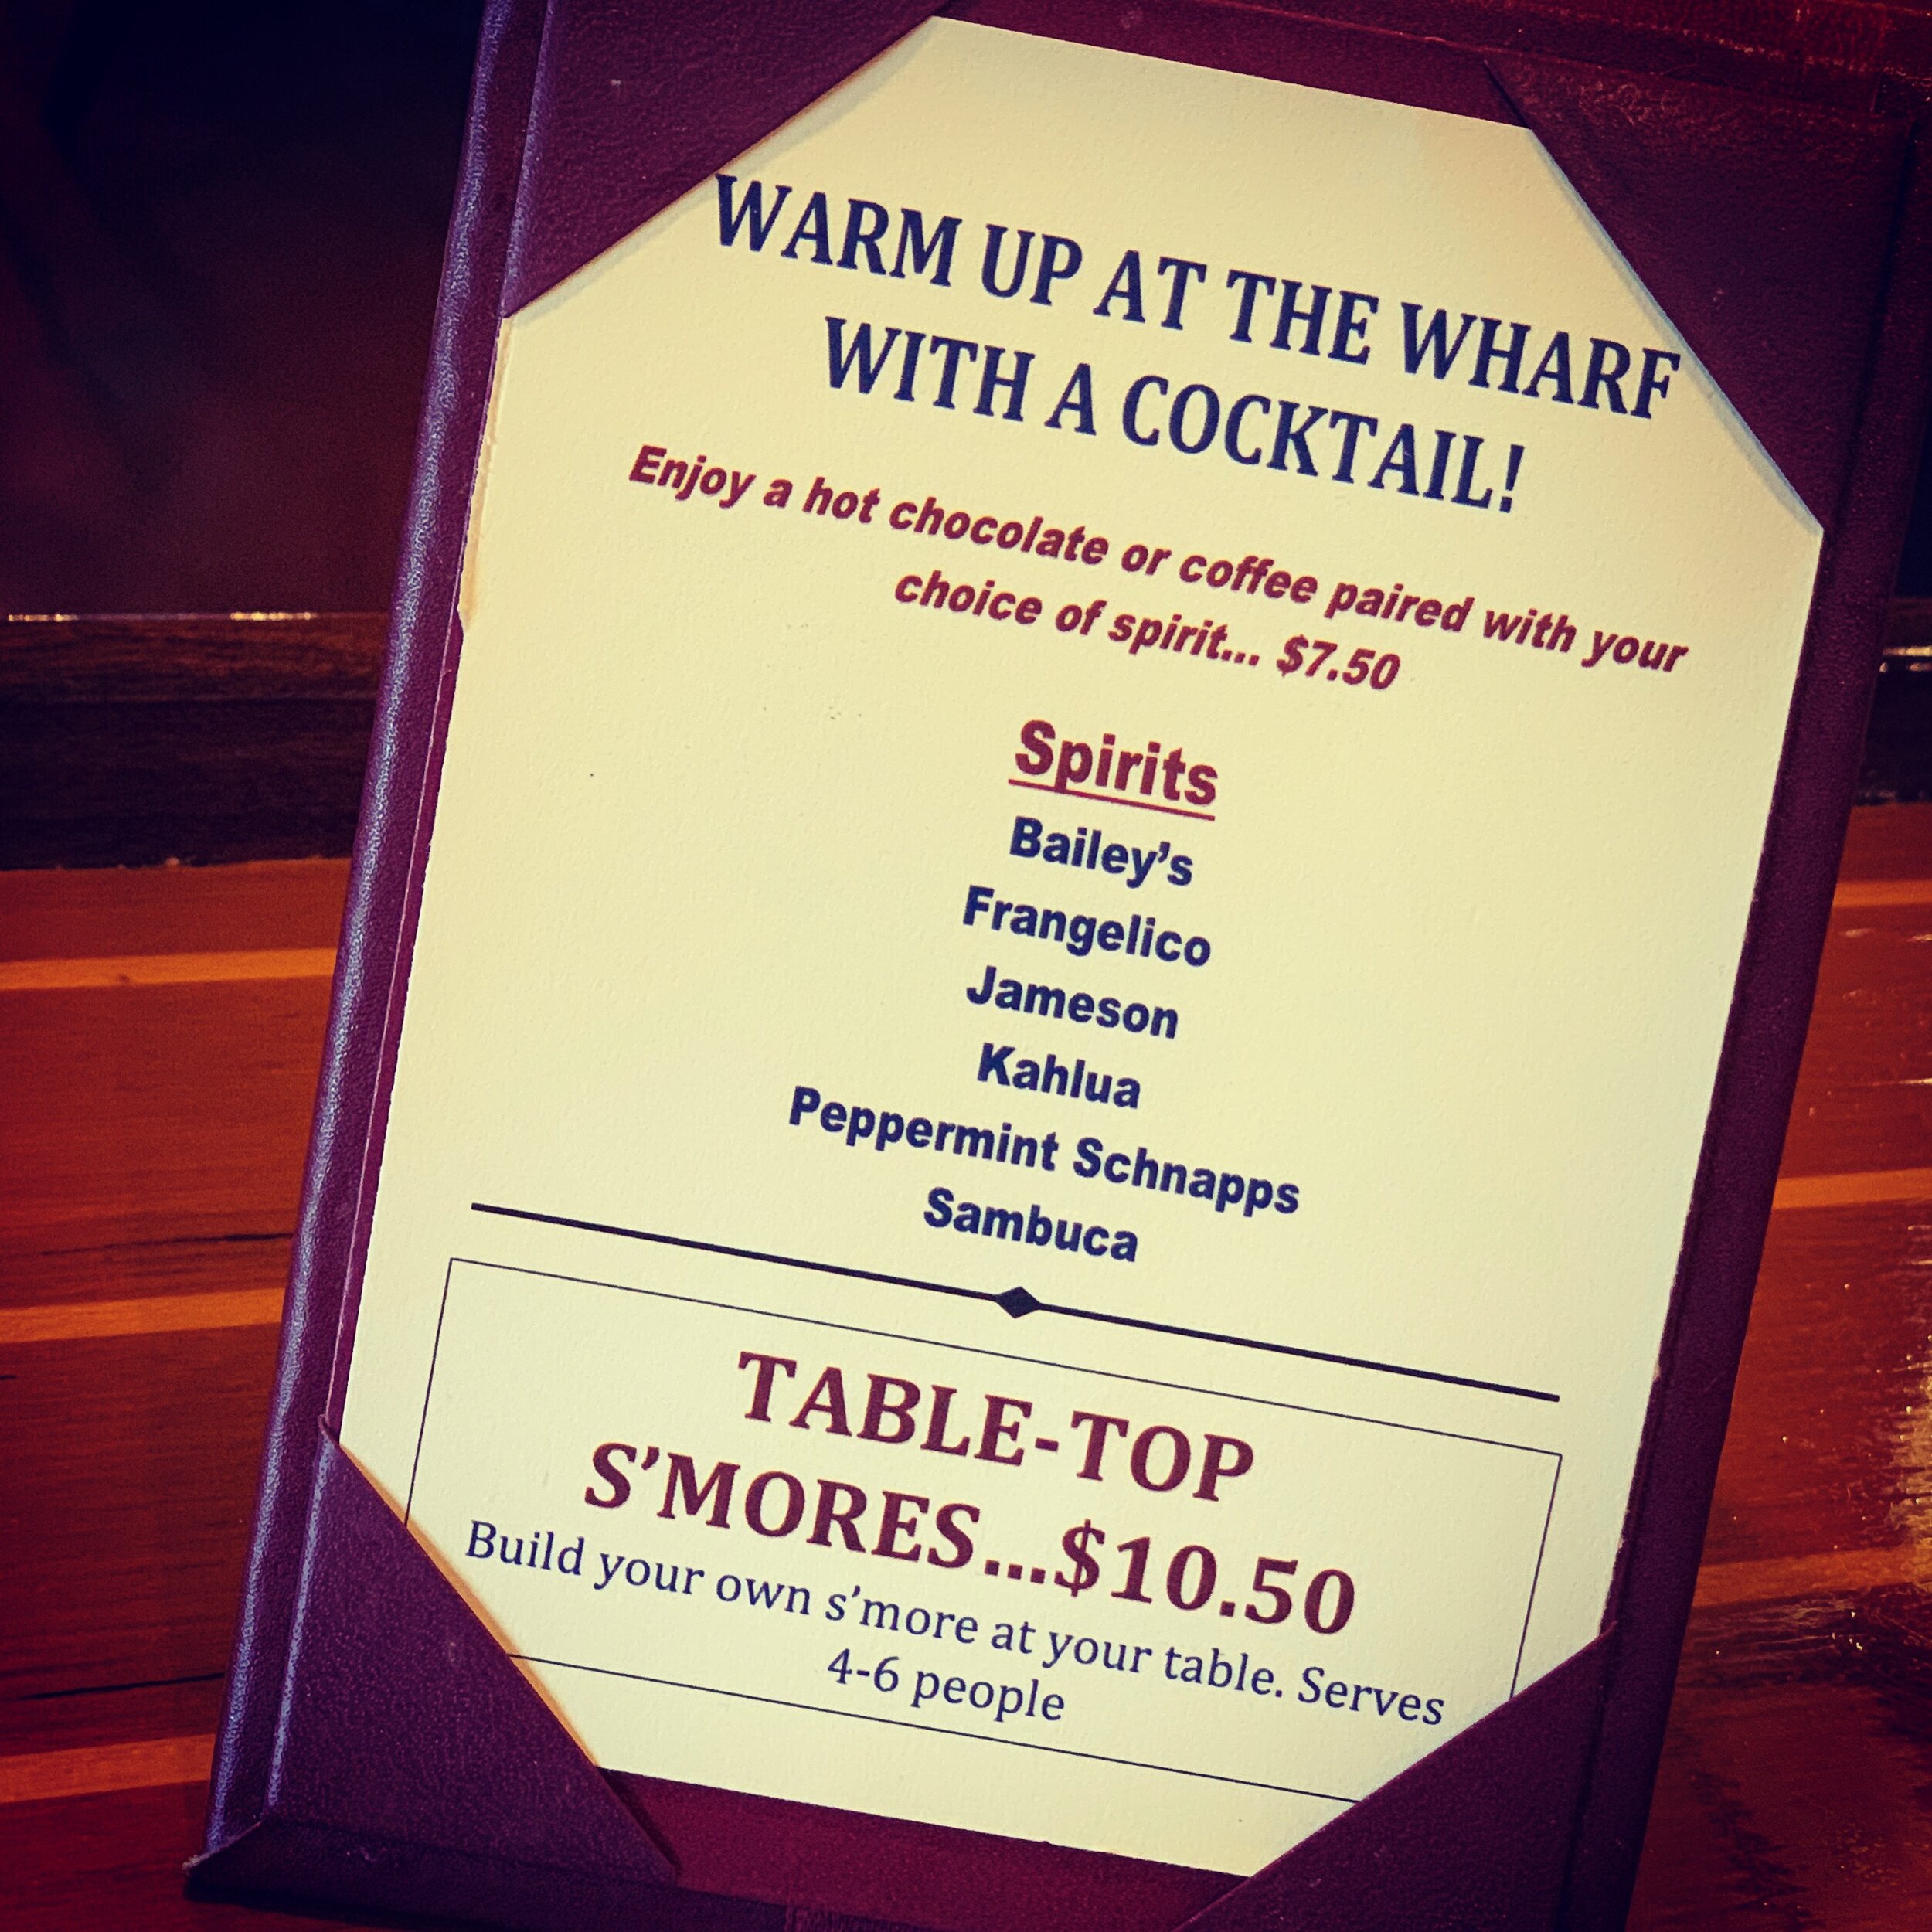 Warm Up With a Cocktail 2019.JPG